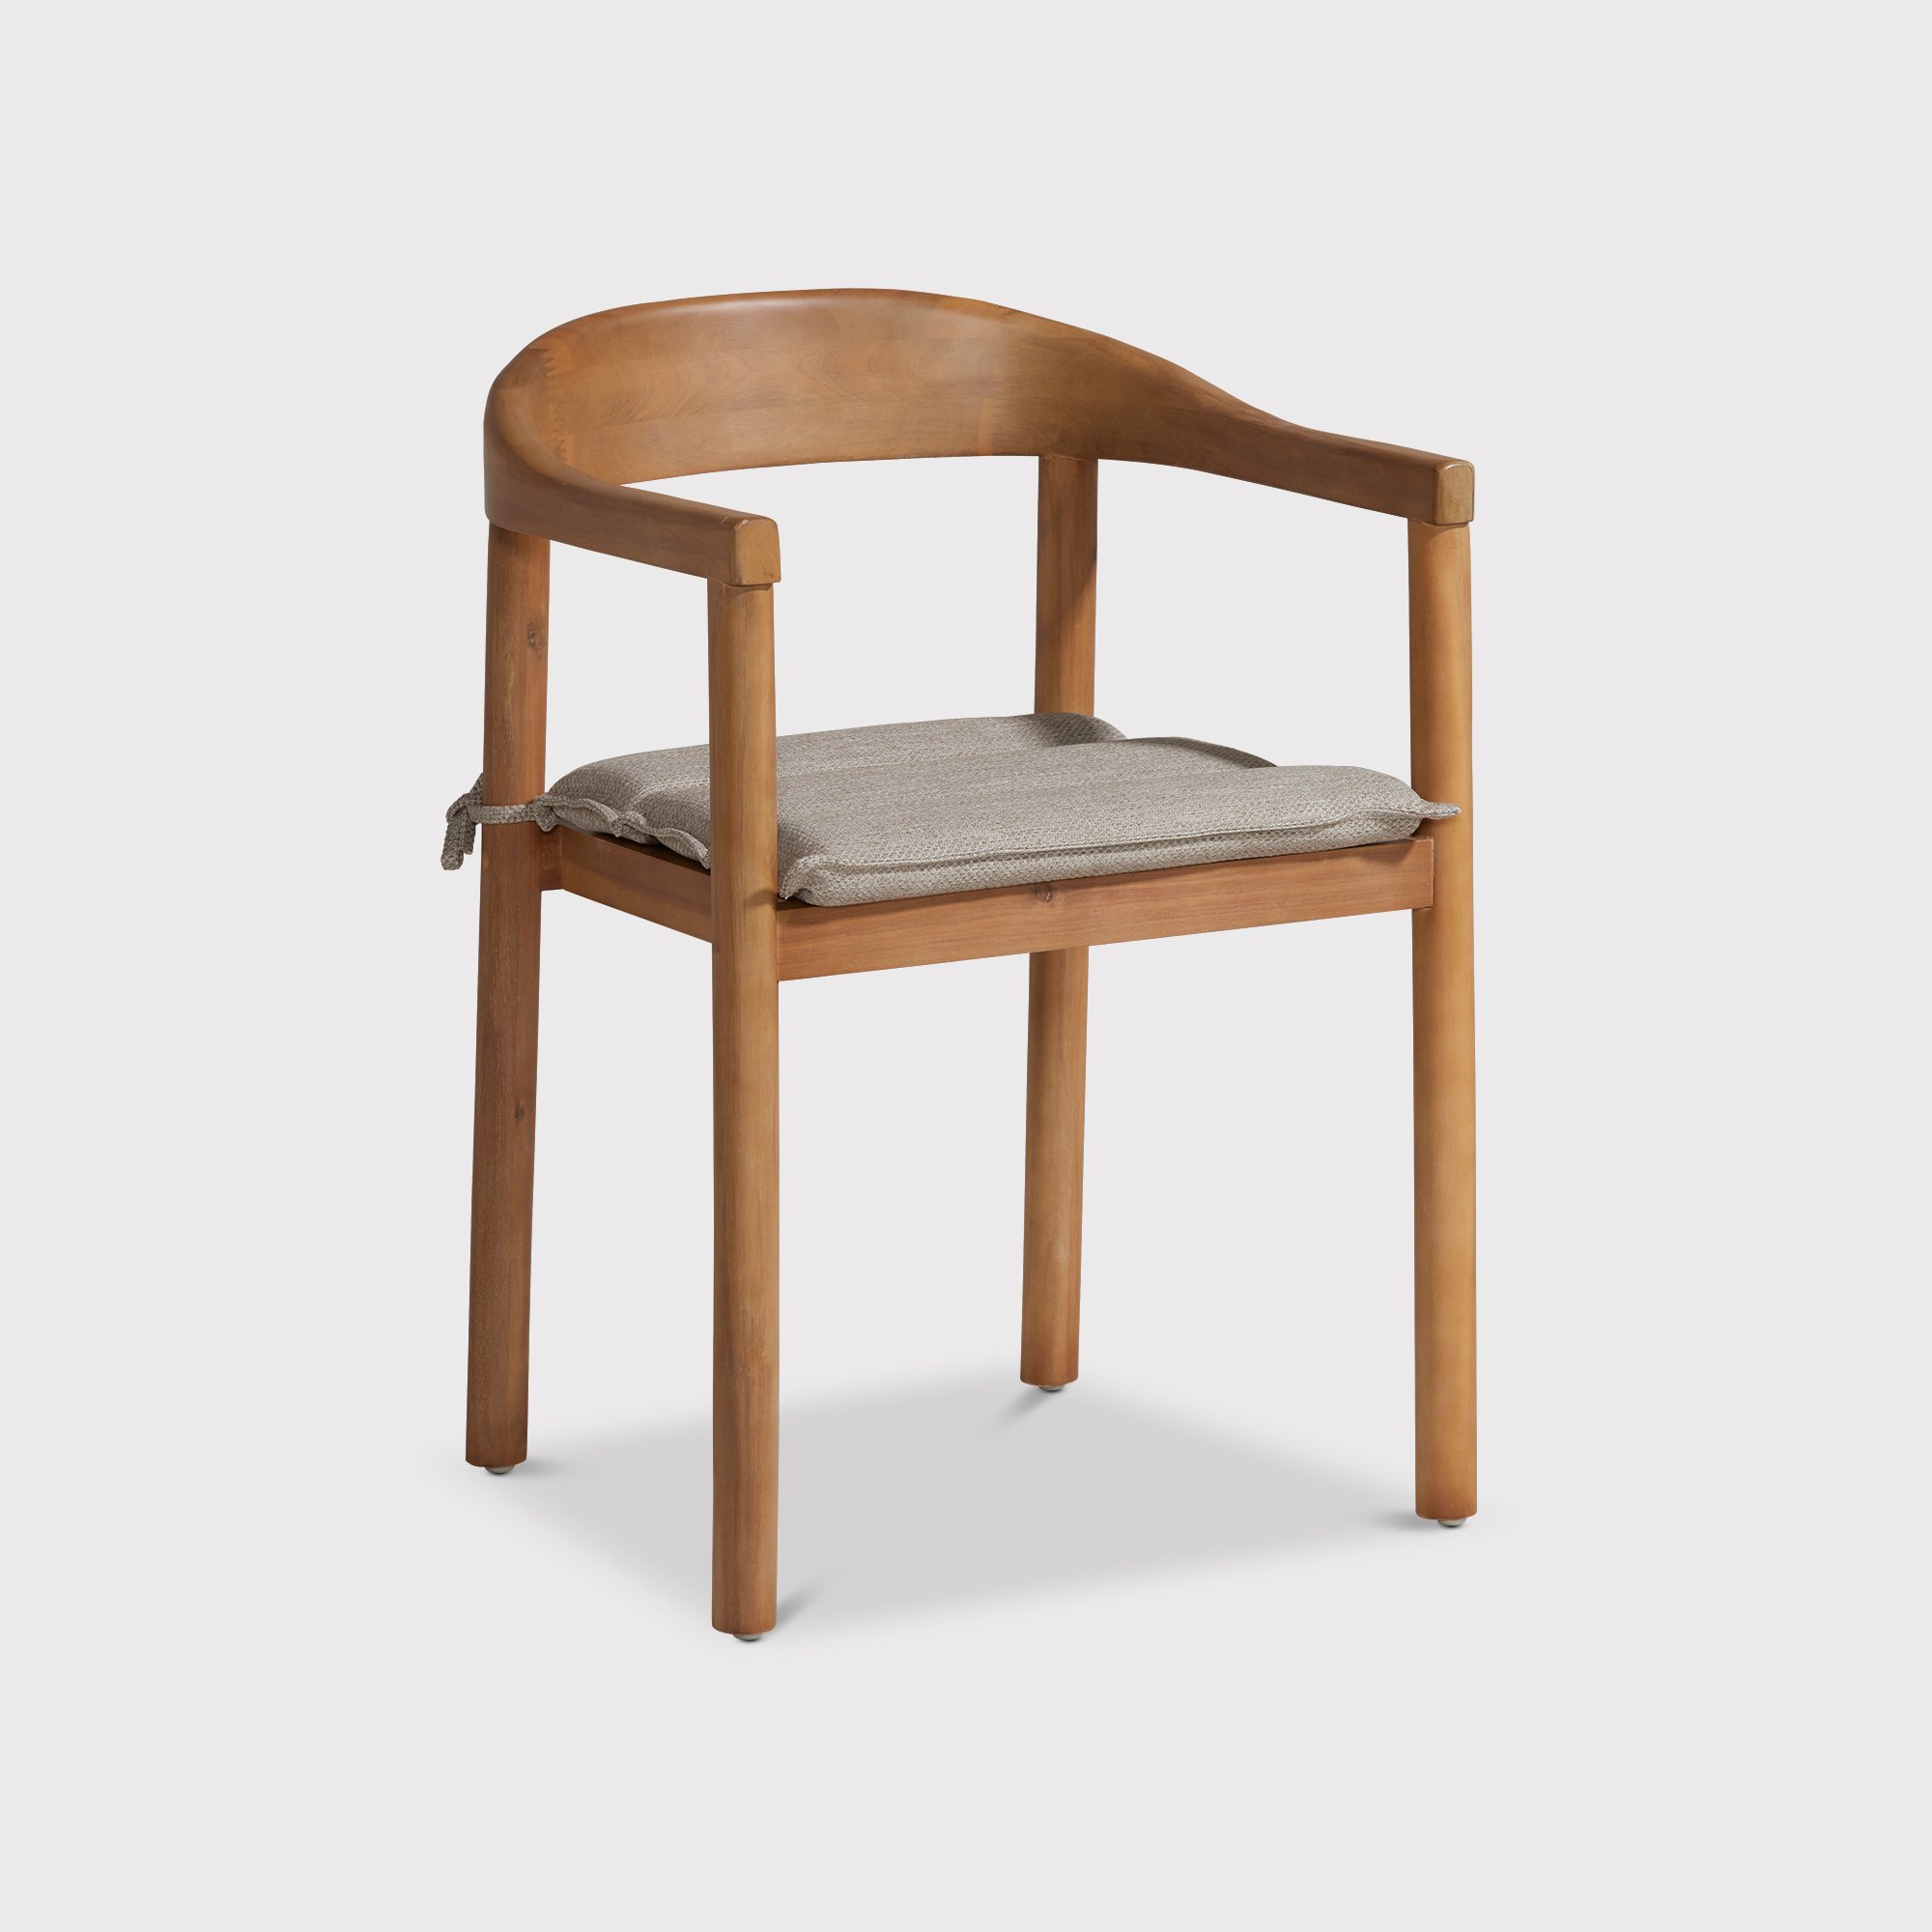 Vigo Dining Chair With Seat Pad, Brown | Barker & Stonehouse